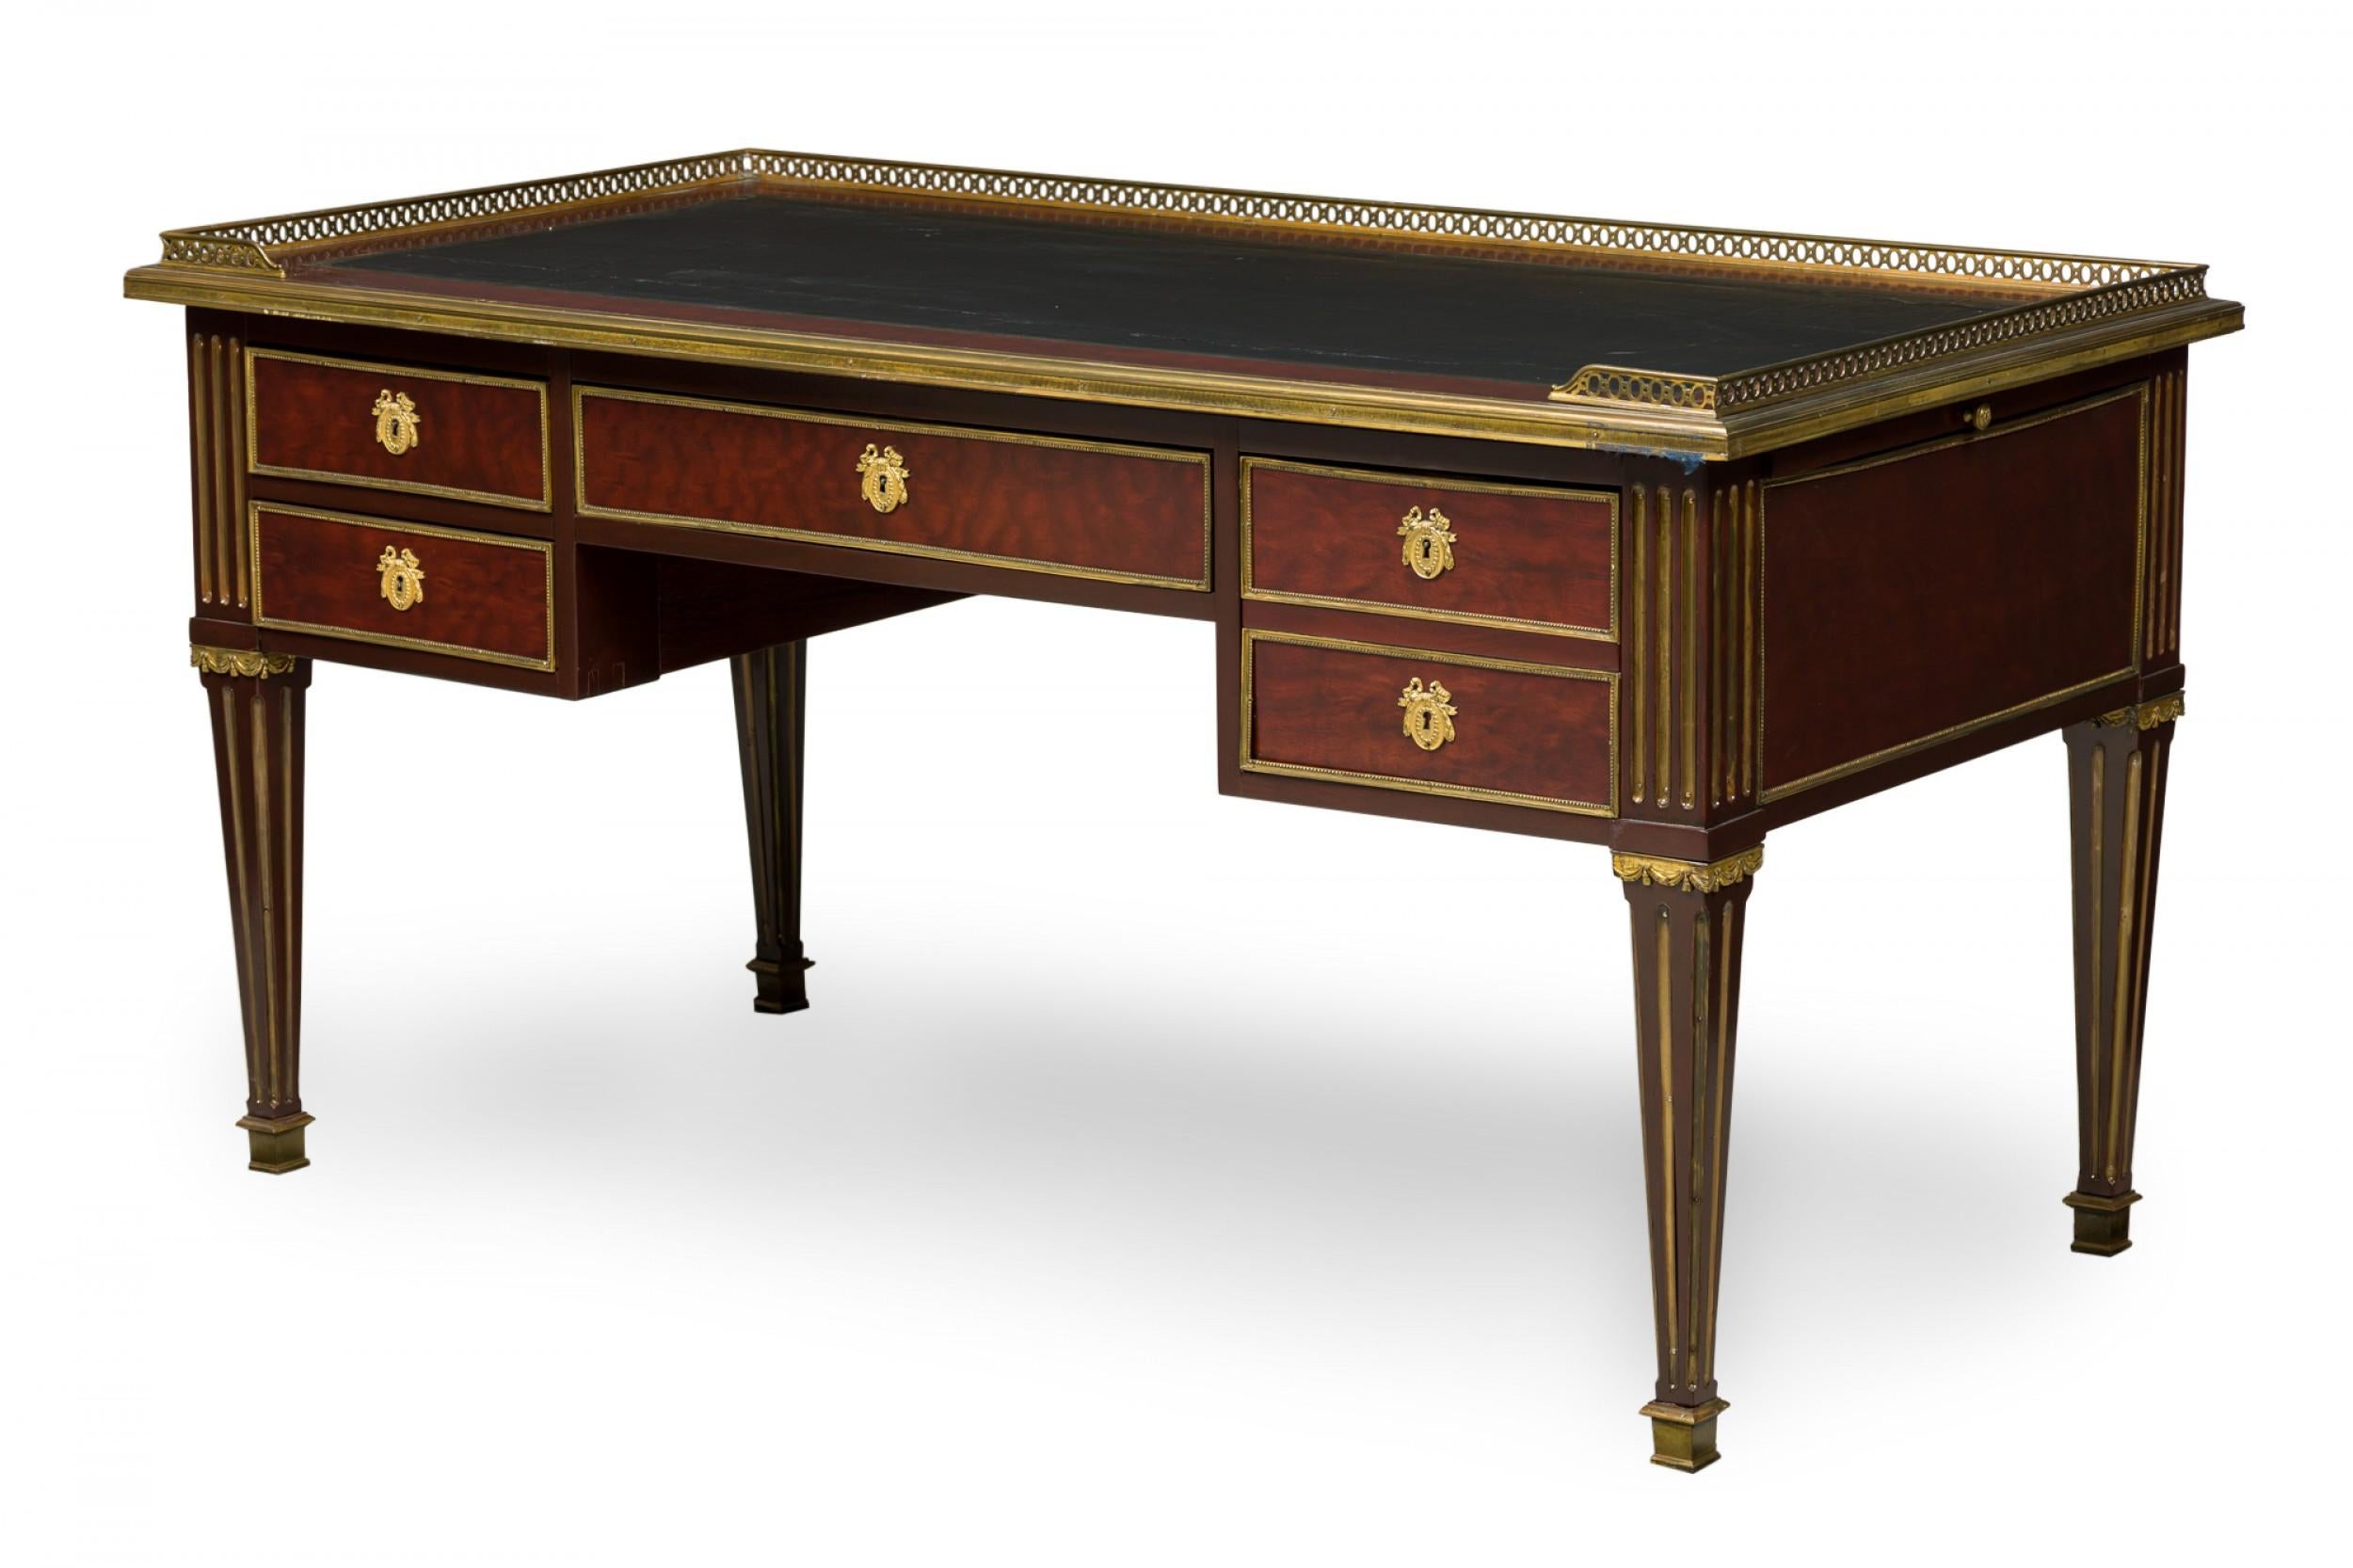 French Directoire (Late 18th Century) mahogany desk with a black leather top surrounded by a shallow reticulated brass gallery, having two drawers on either side of a central drawer, and an additional black leather topped writing surface that